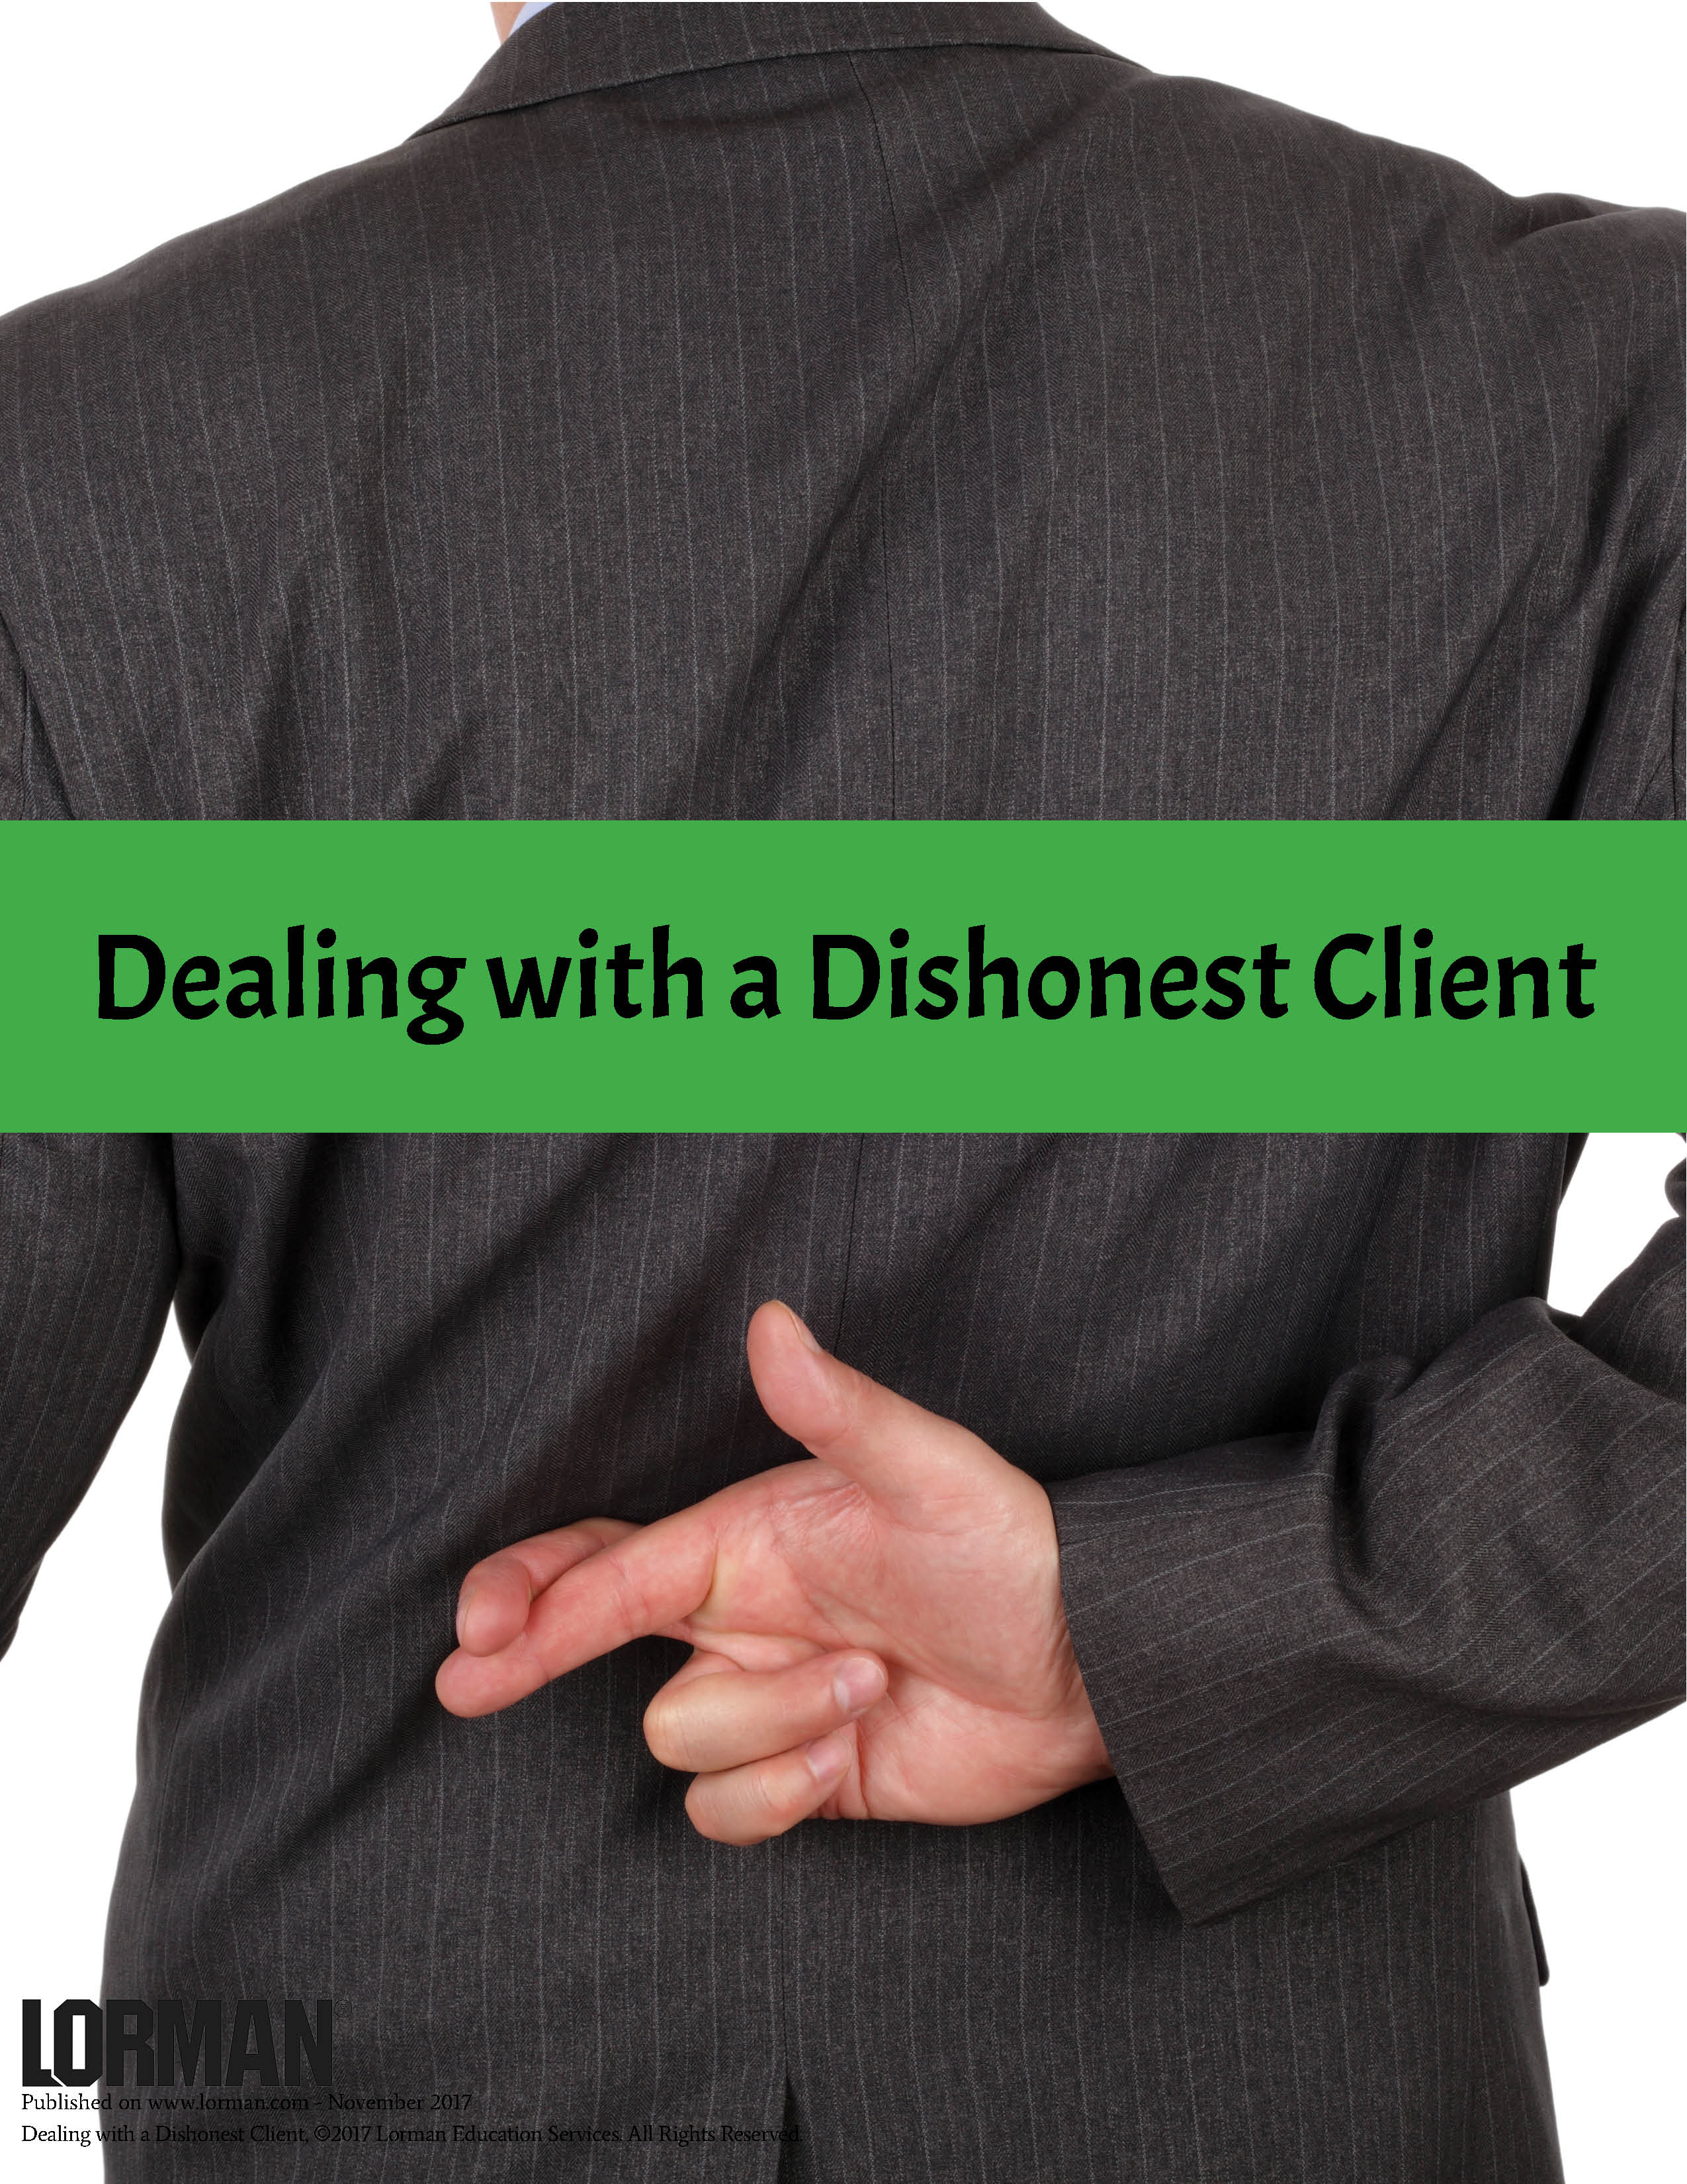 Dealing with a Dishonest Client